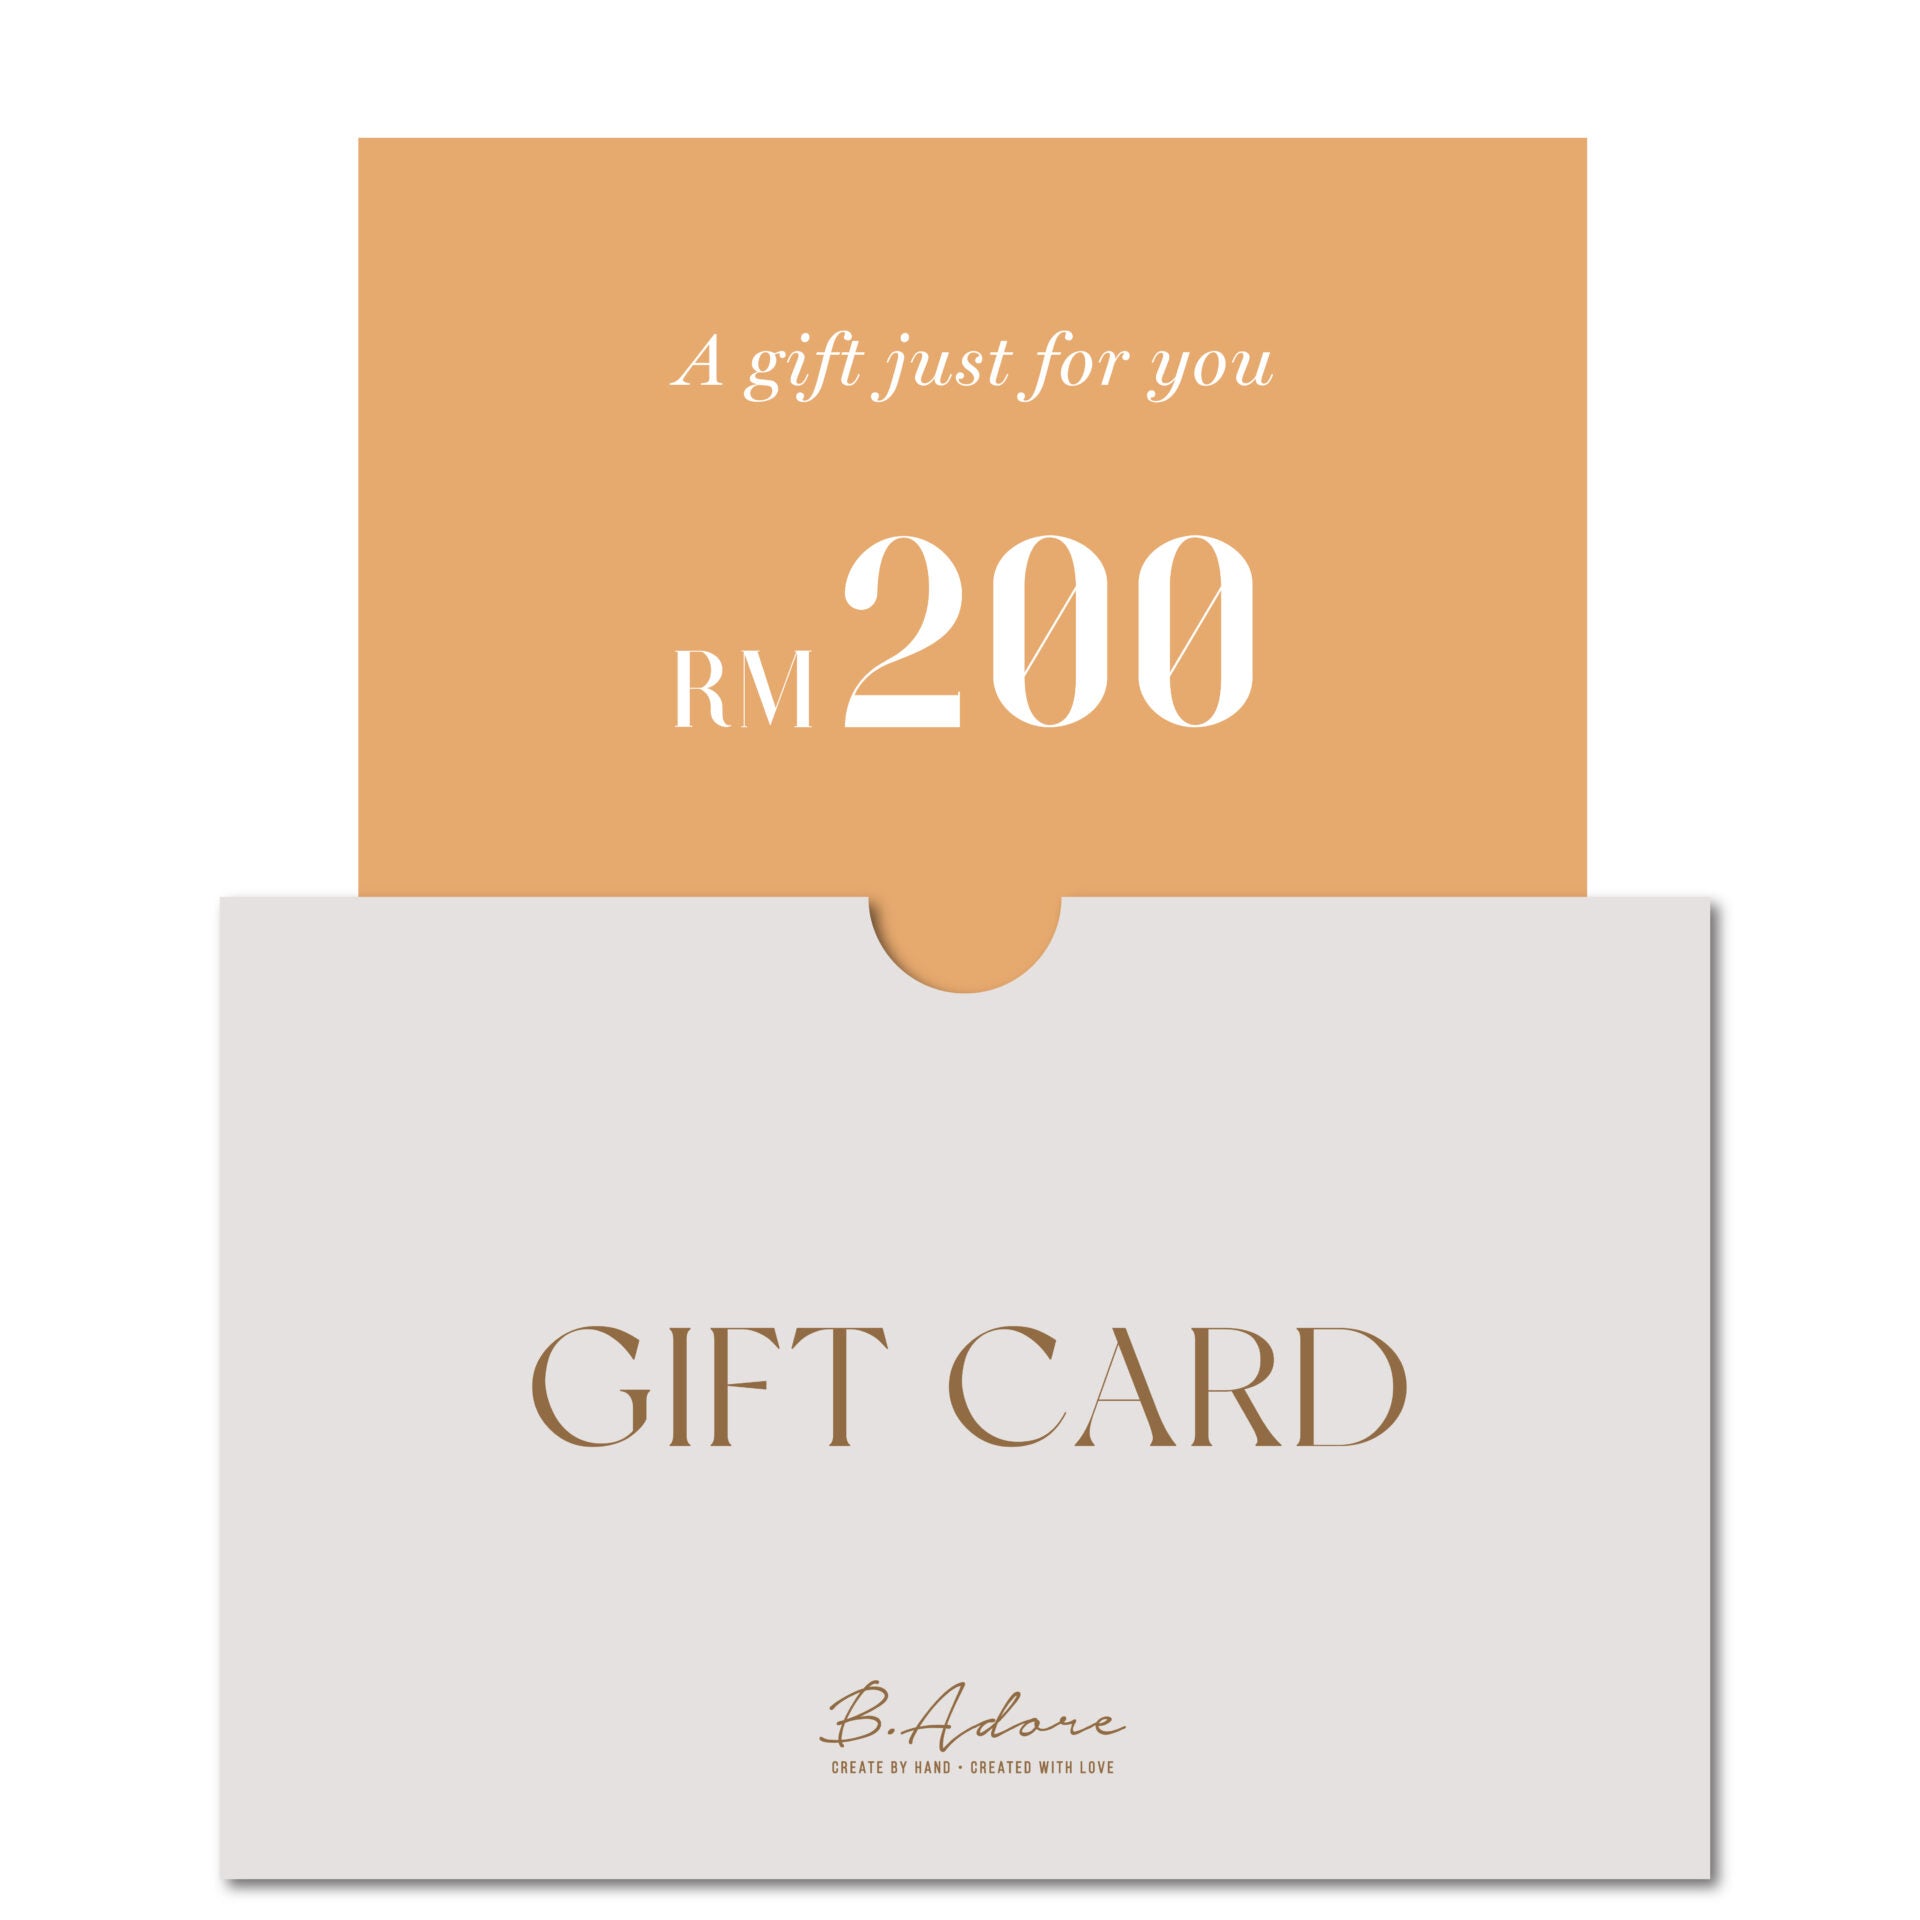 Gift-Card-04-scaled